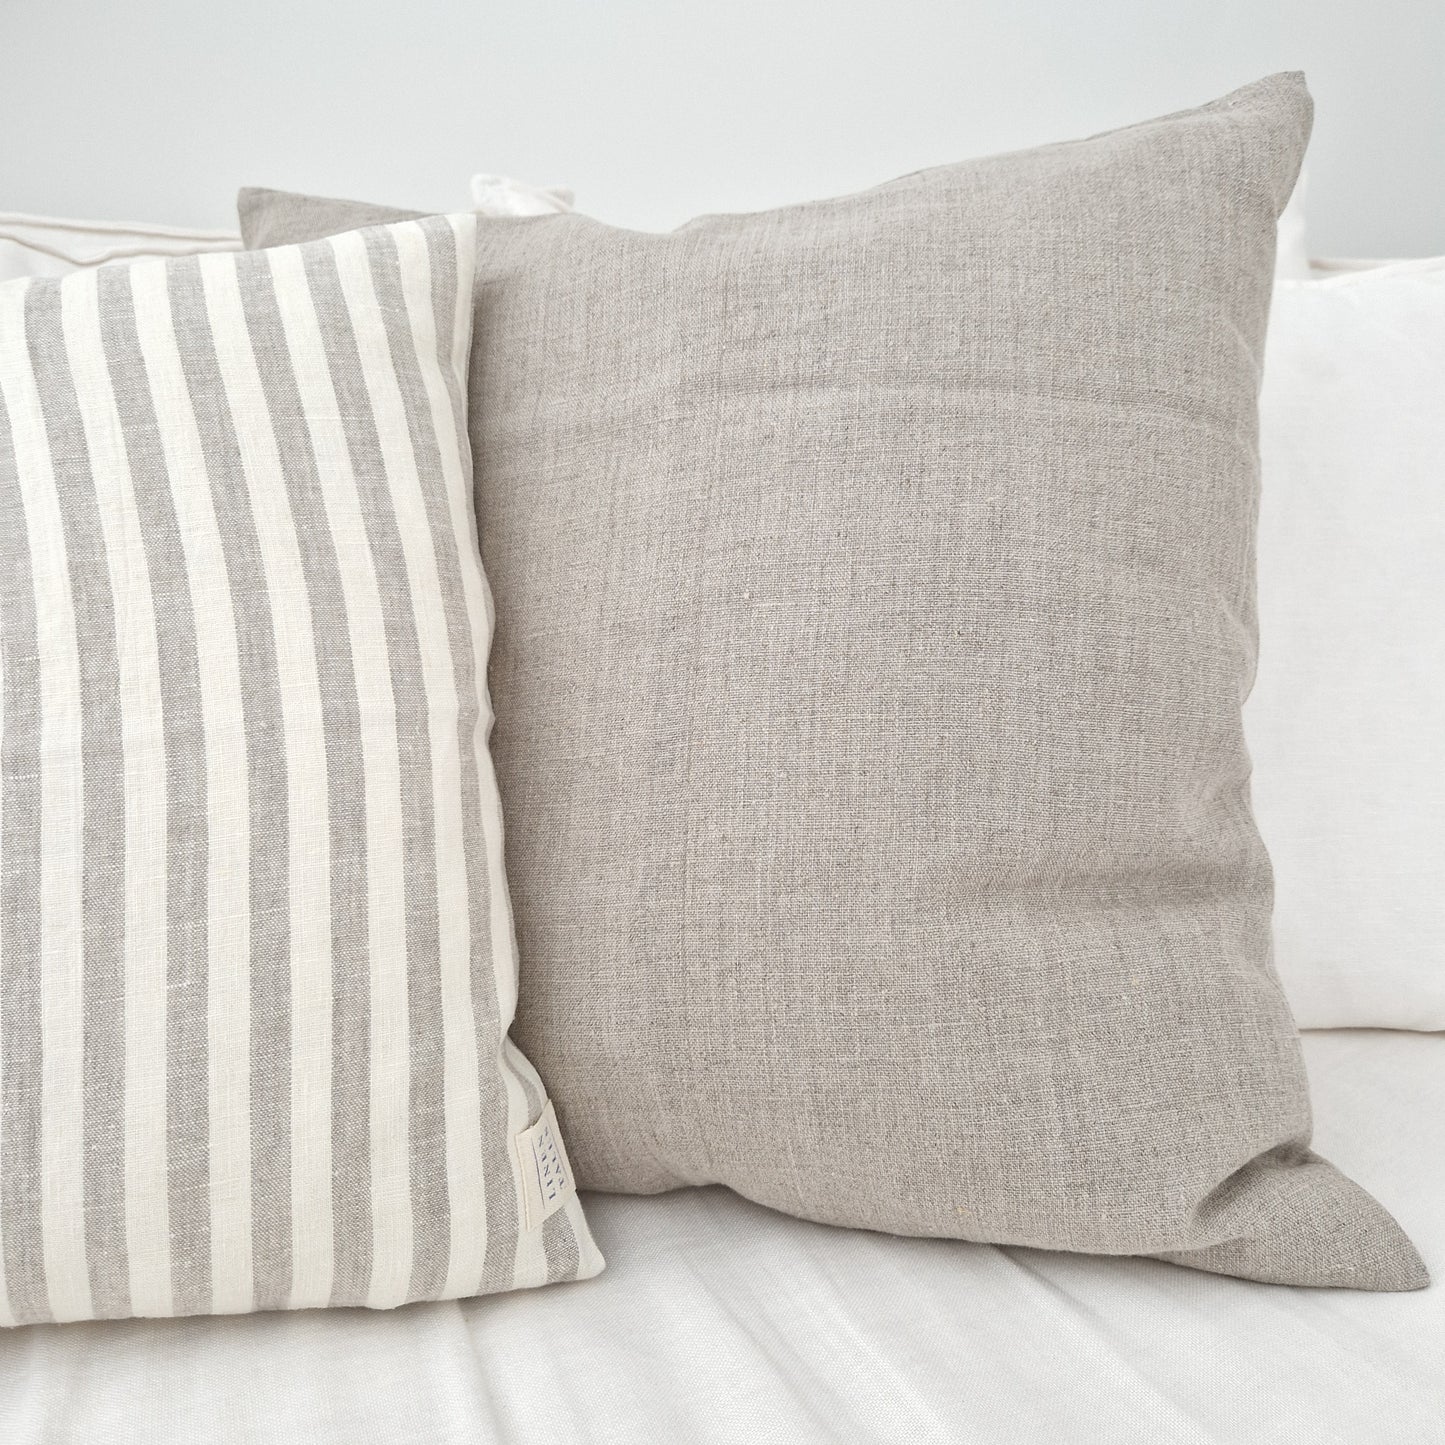 Linen cushion cover Striped Off-White/Natural 50x50